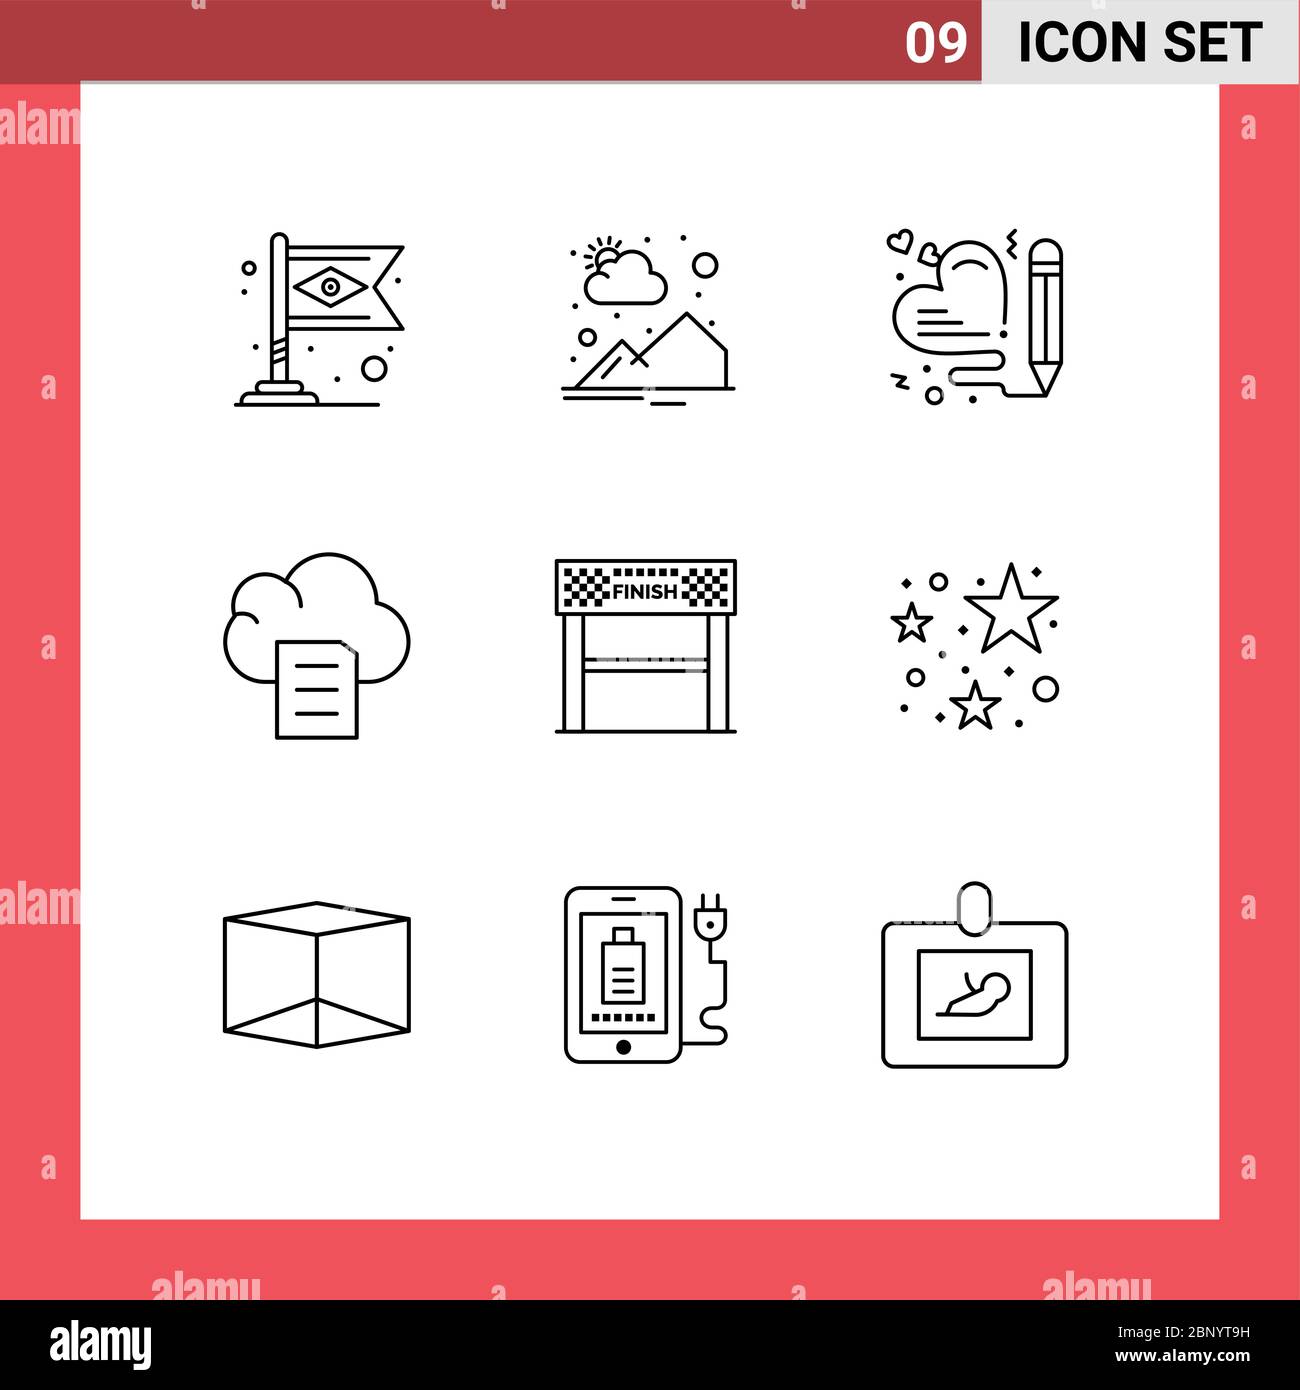 9 Universal Outlines Set for Web and Mobile Applications sport, finish, heart, document, cloud Editable Vector Design Elements Stock Vector